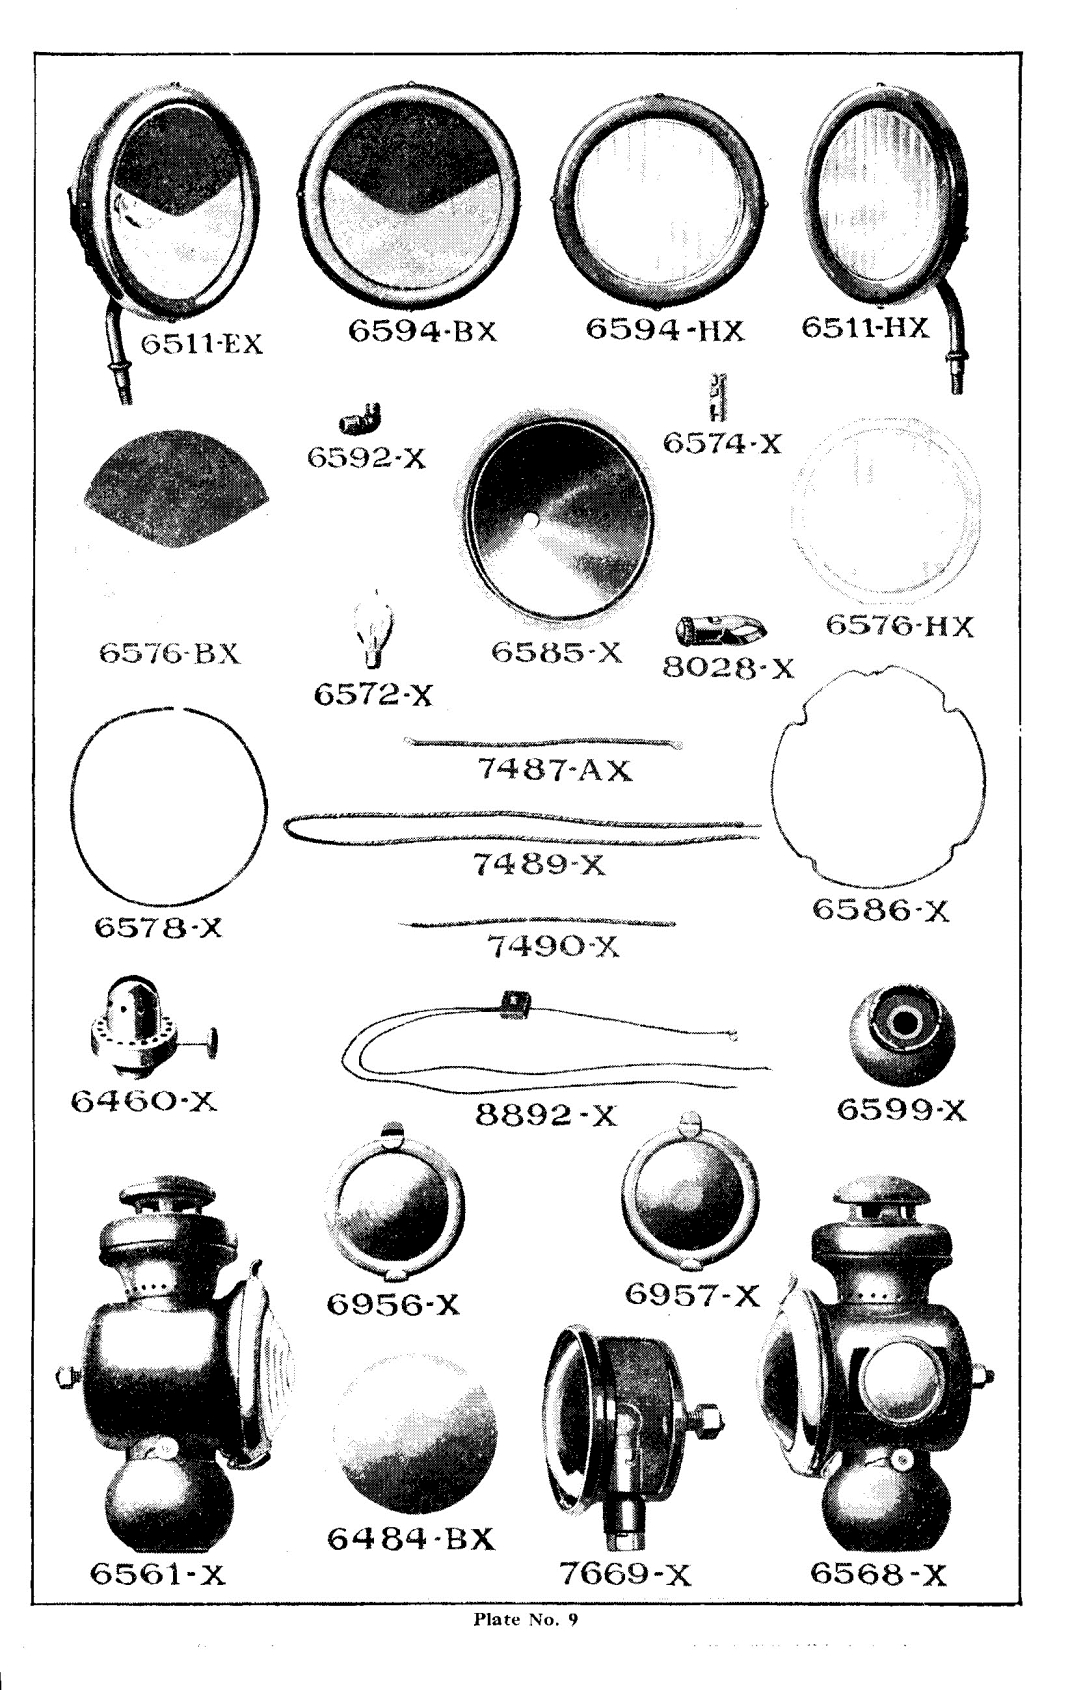 1922_Ford_Parts_List-31